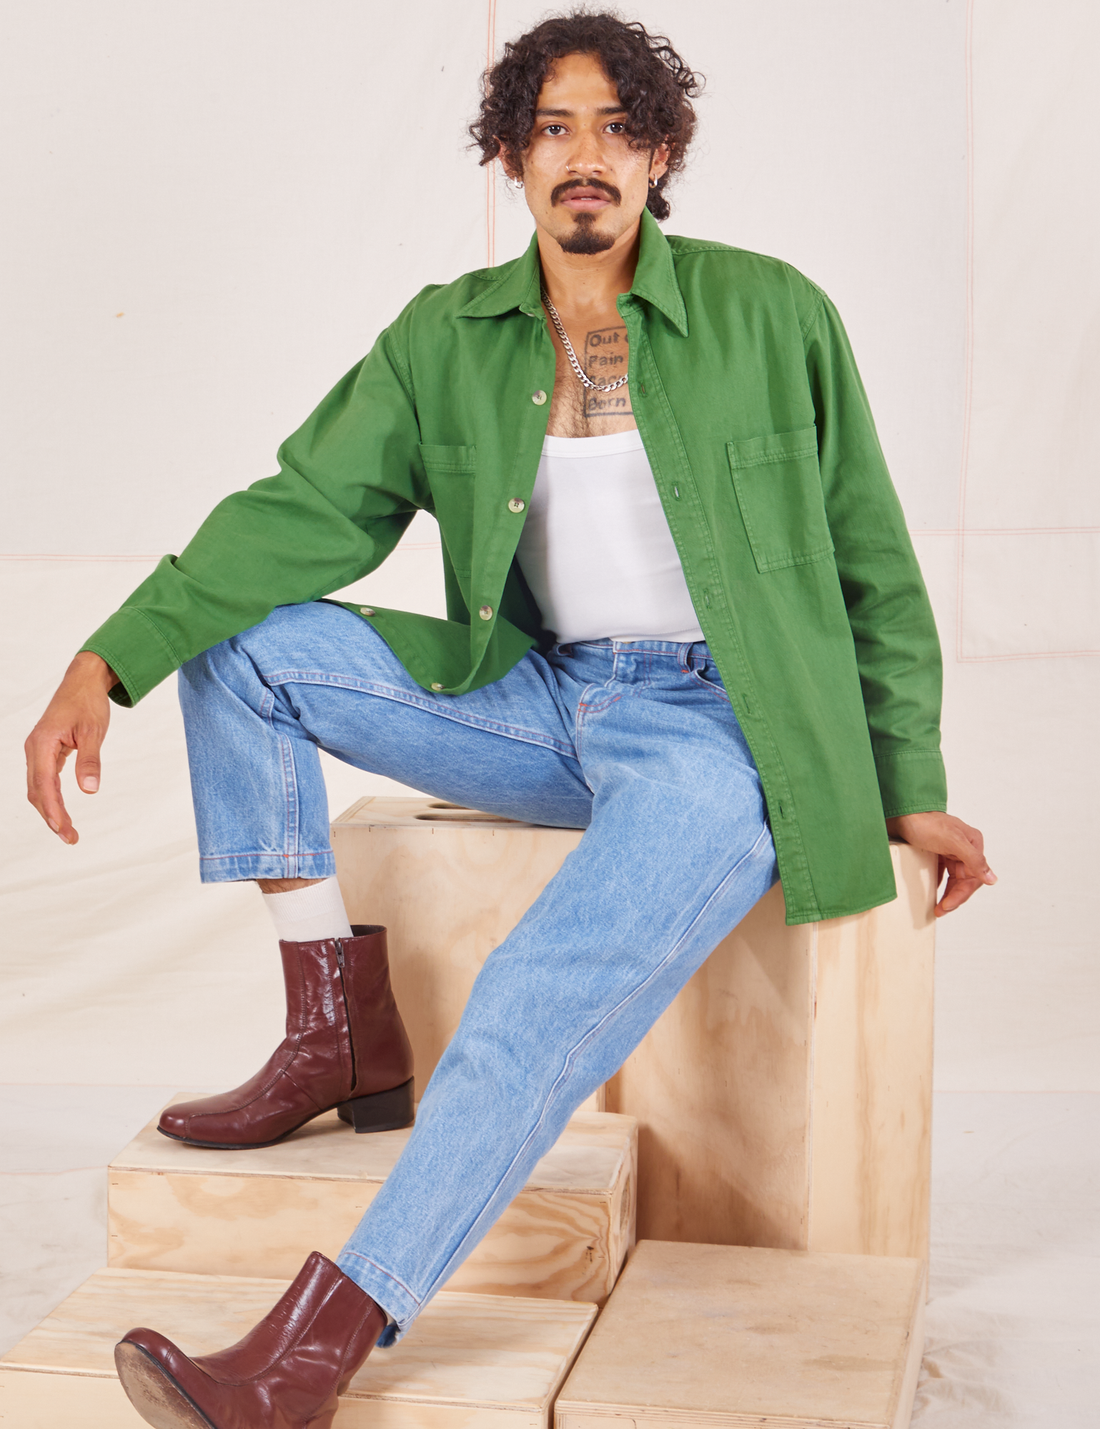 Jesse is wearing Oversize Overshirt in Lawn Green paired with vintage off-white Cropped Tank Top 